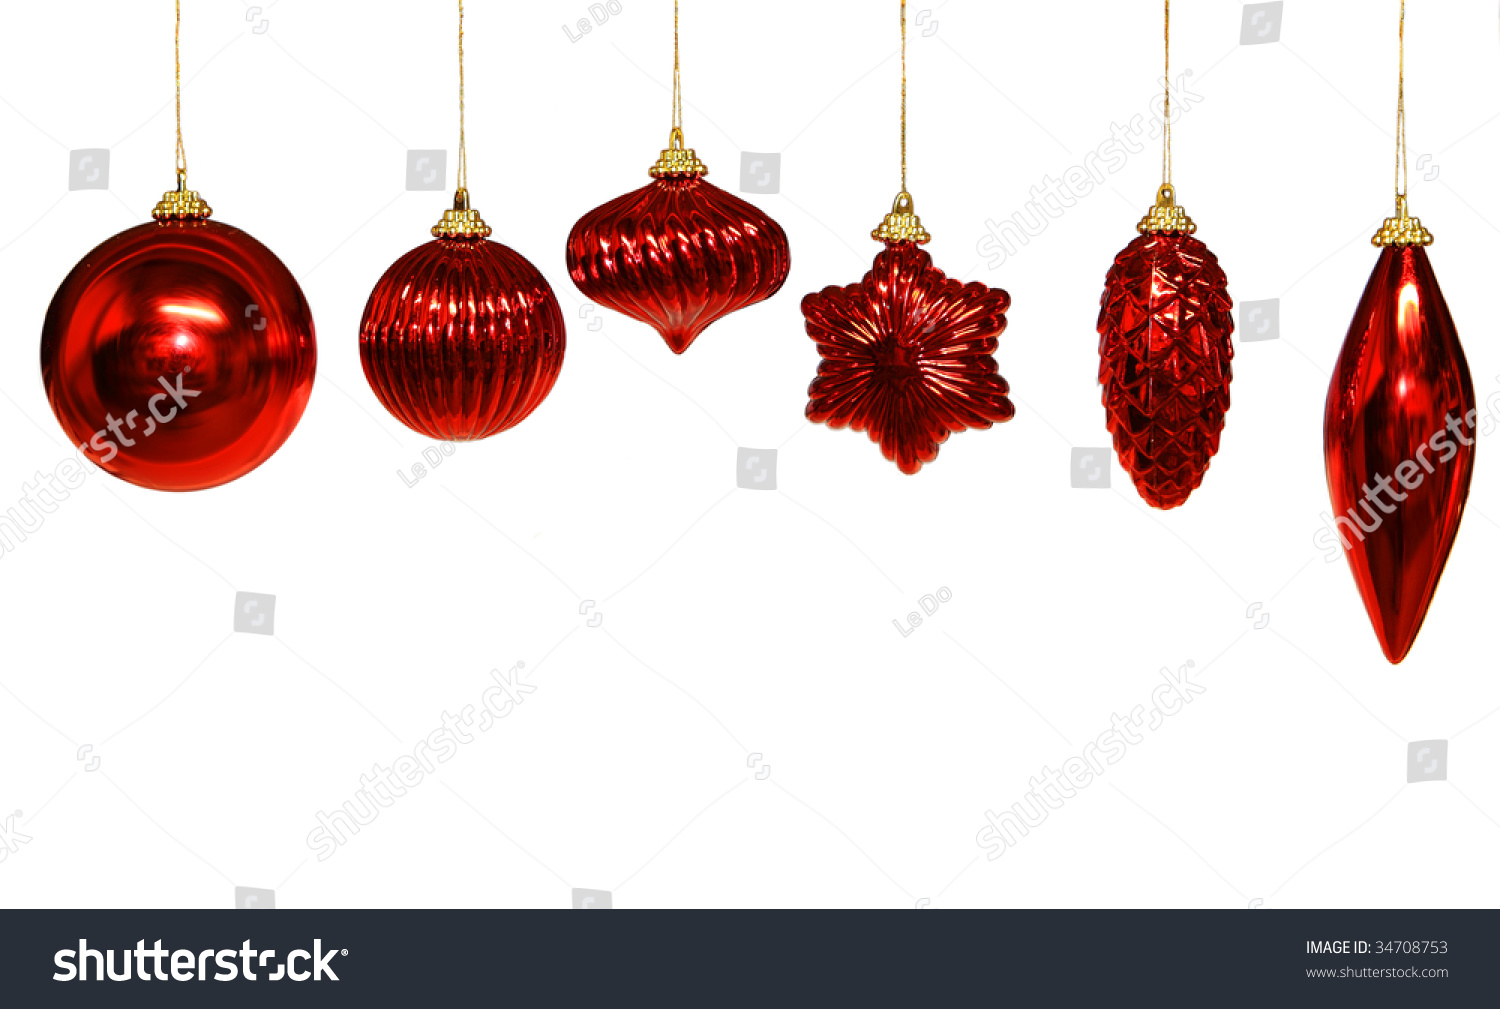 Six Different Shapes Christmas Ornament Isolated Stock Photo 34708753 